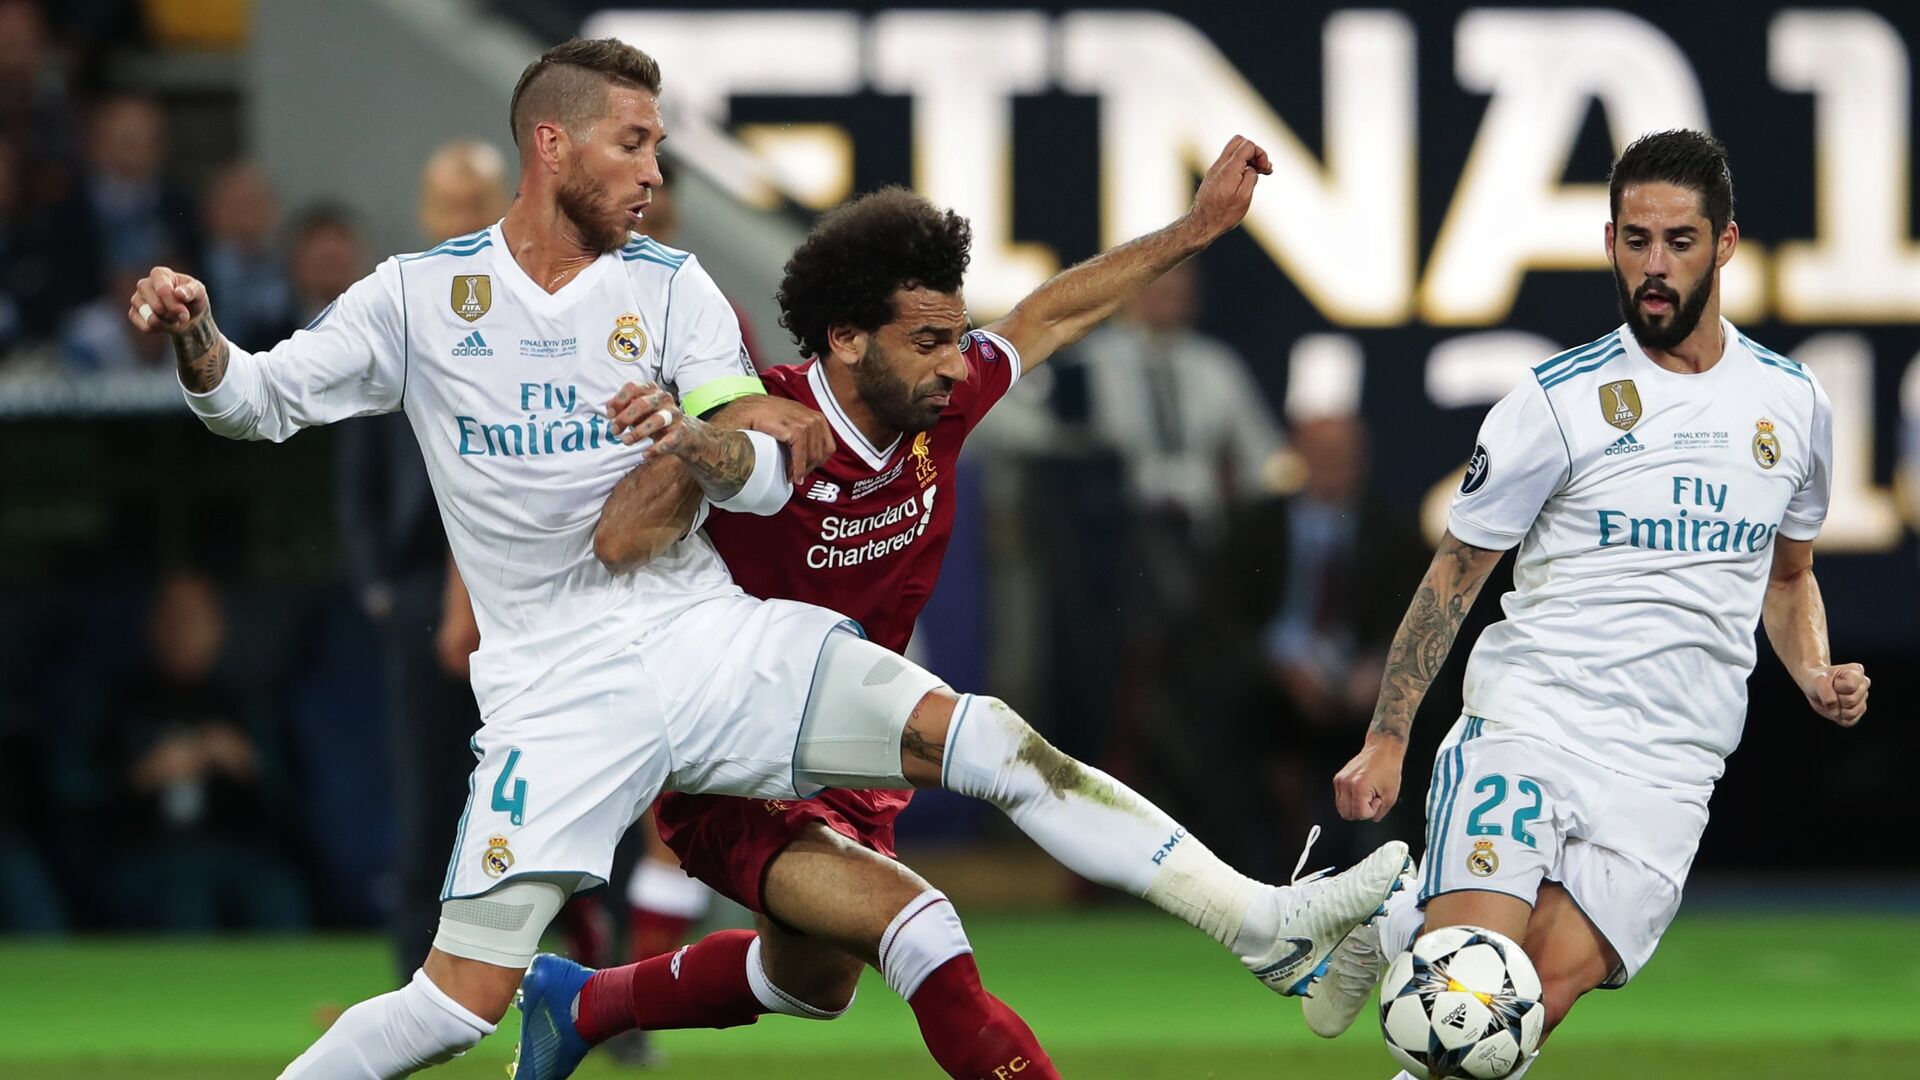 From left: Sergio Ramos from Real Madrid FC (Madrid, Spain), Mohamed Salah from Liverpool FC (Liverpool, England) and Isco from Real Madrid FC during the 2017-2018 UEFA Champions League final match between Liverpool FC and Real Madrid FC - اسپوتنیک افغانستان  , 1920, 19.03.2021